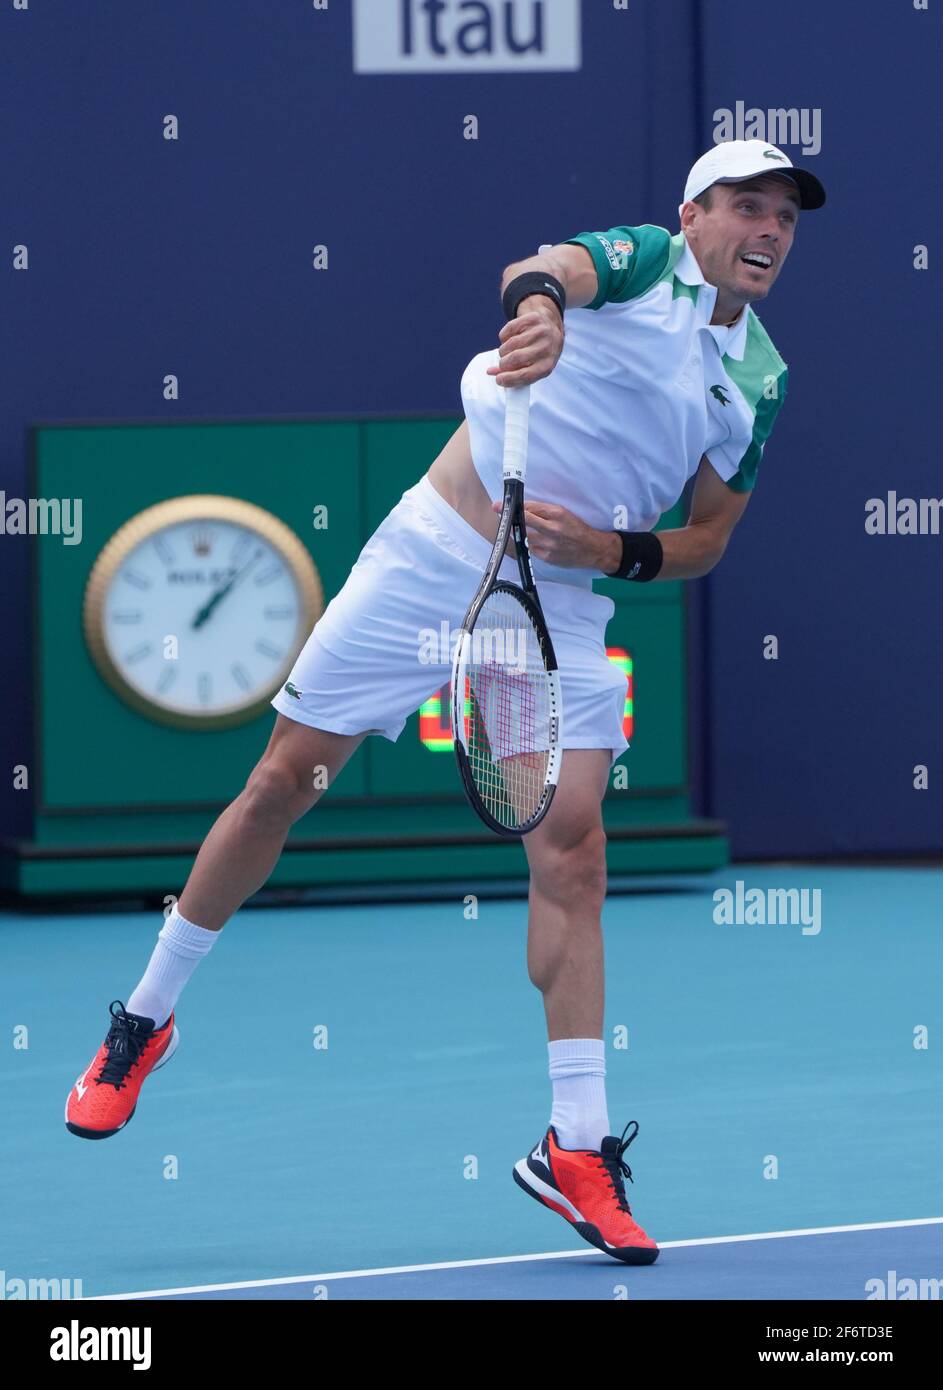 Miami, United States Of America. 02nd Apr, 2021. MIAMI GARDENS, FLORIDA - APRIL 02: Roberto Bautista Agut of Spain serves to Jannick Sinner of Italy in the semifinals during the Miami Open at Hard Rock Stadium on April 02, 2021 in Miami Gardens, Florida. (Photo by Alberto E. Tamargo/Sipa USA) Credit: Sipa USA/Alamy Live News Stock Photo